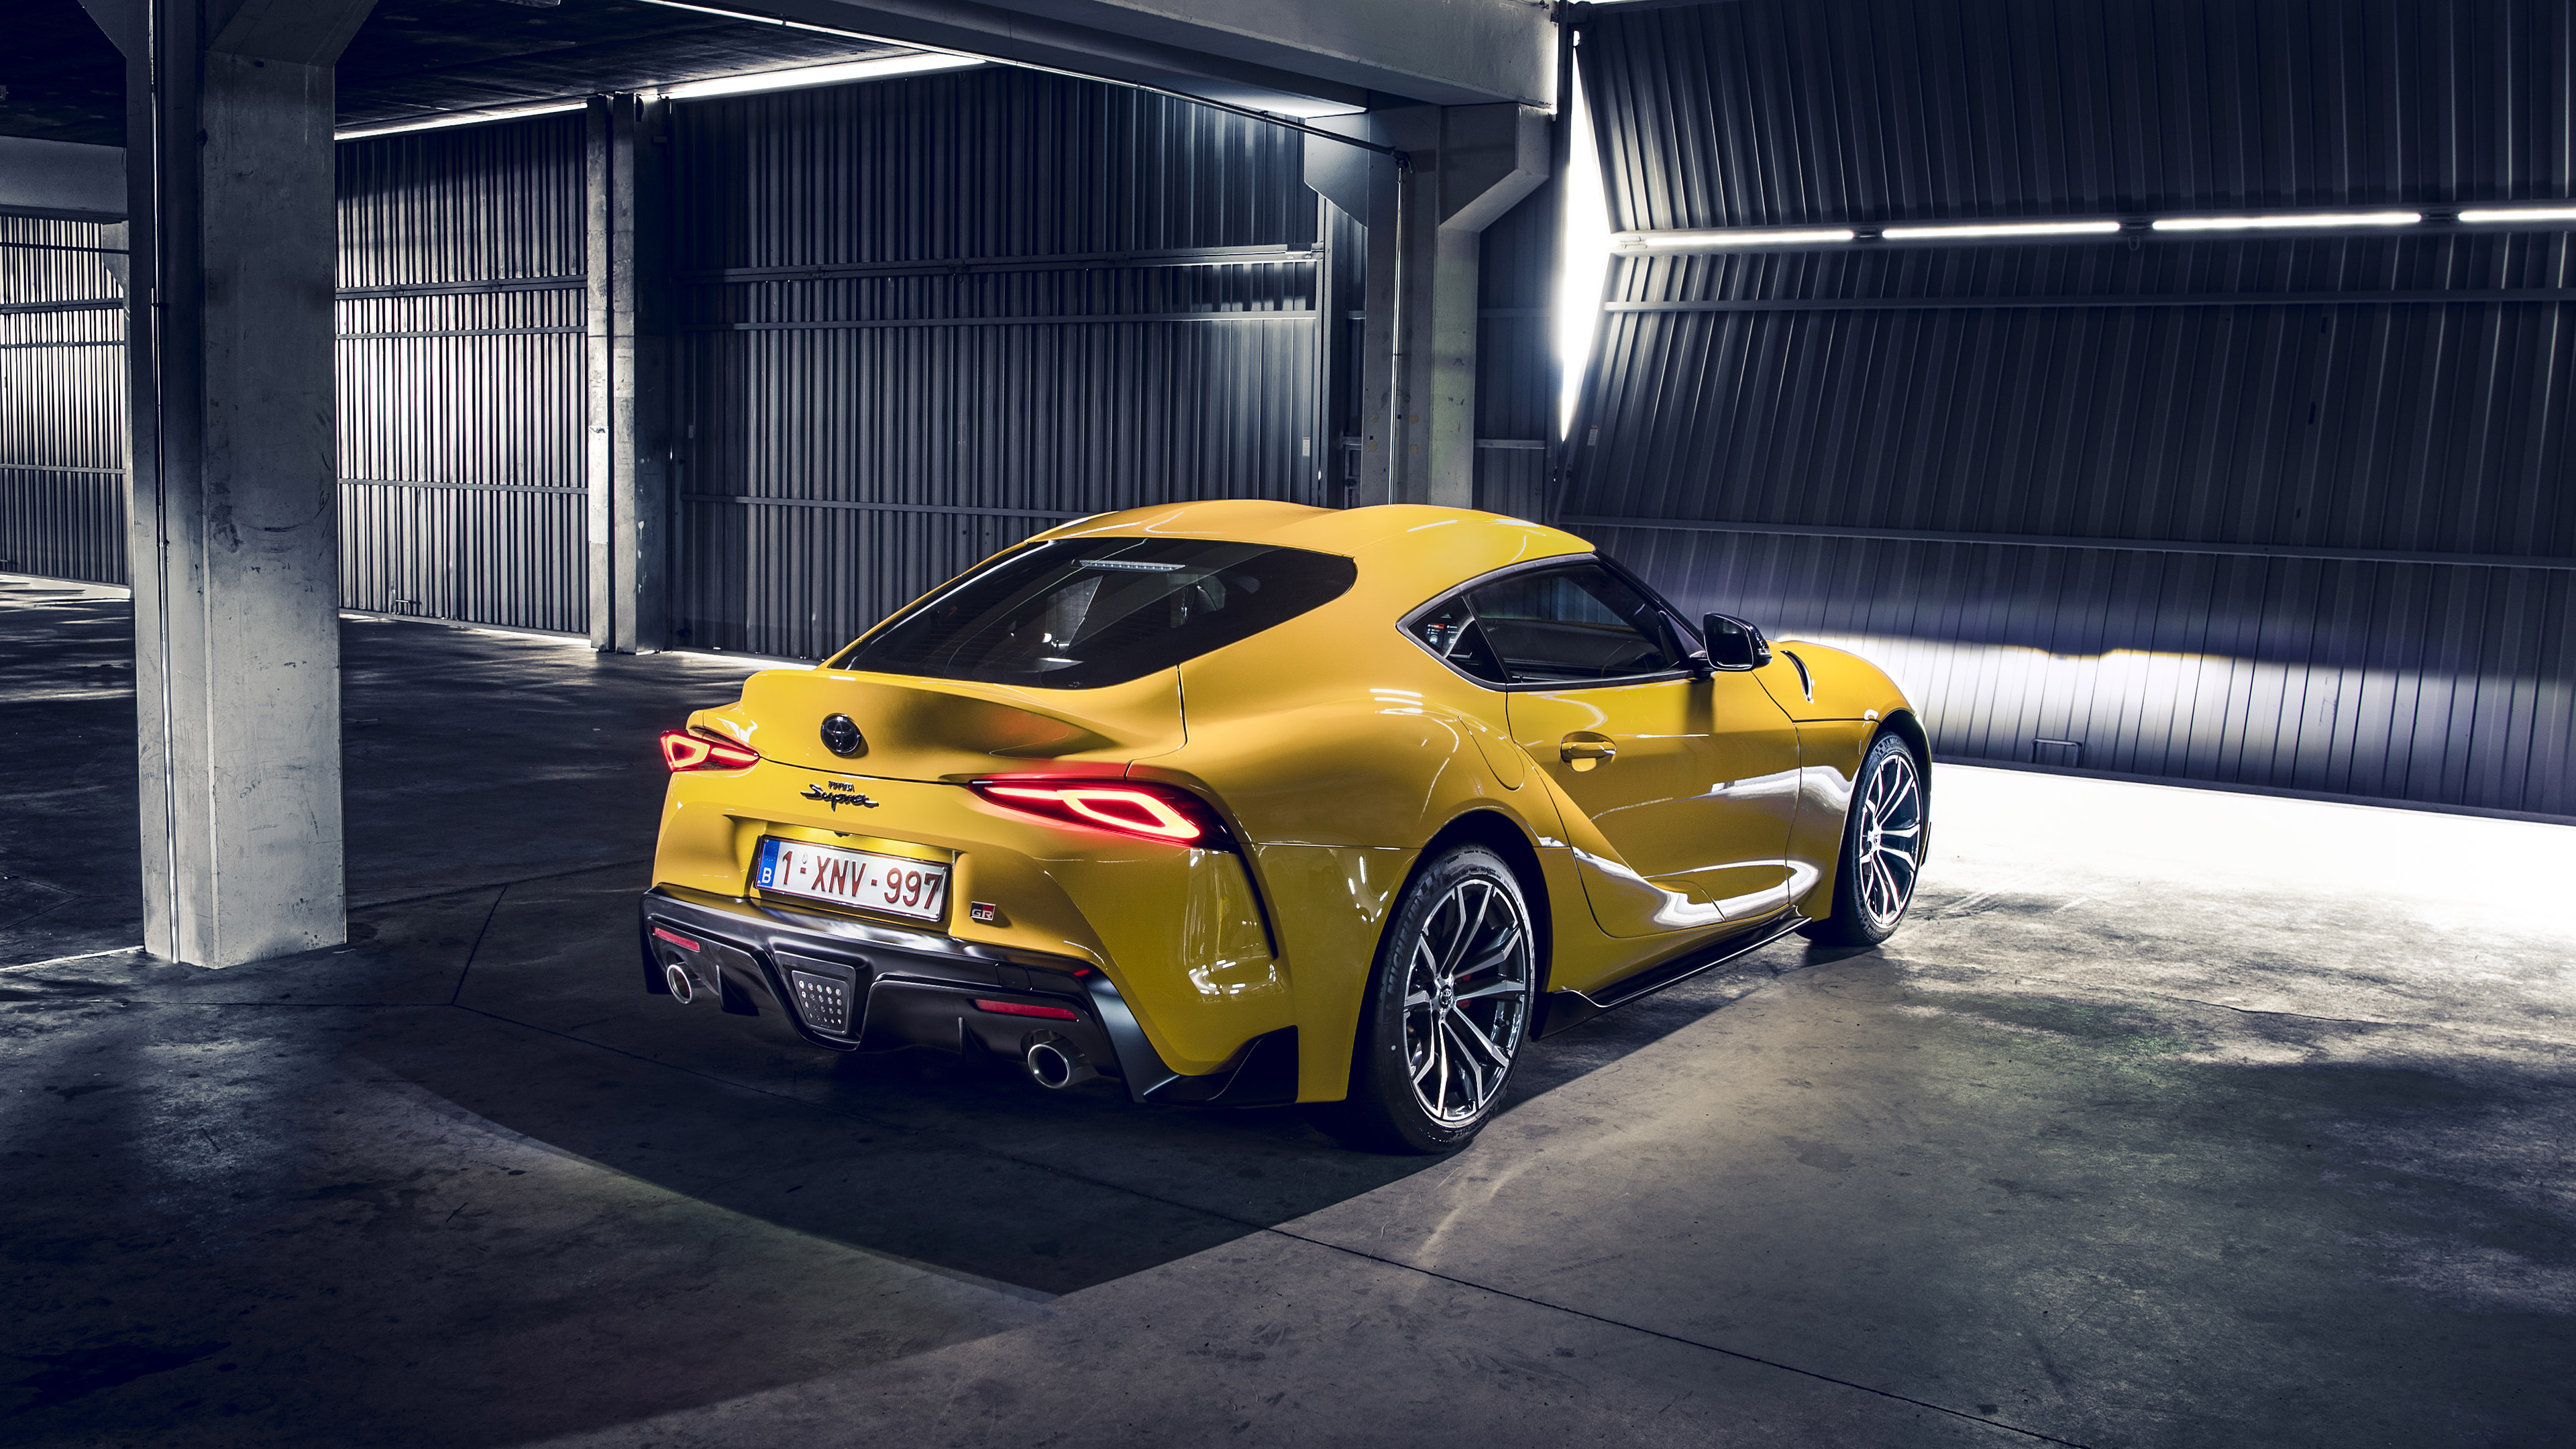 General 3840x2160 Toyota Supra car vehicle Toyota yellow cars Japanese cars licence plates